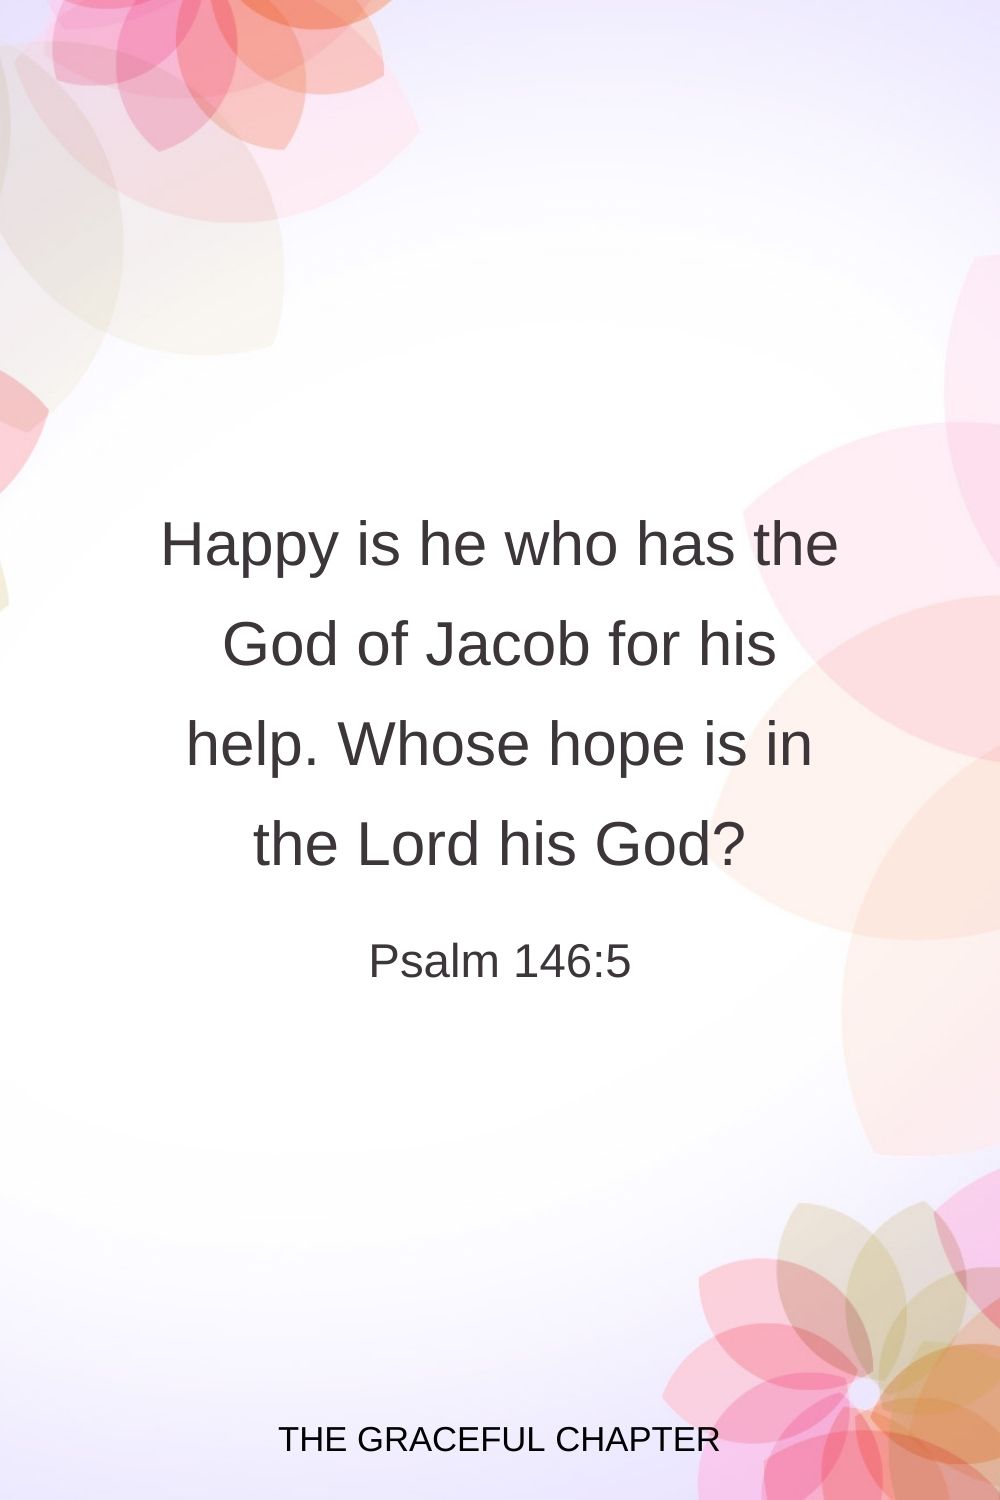 Happy is he who has the God of Jacob for his help, Whose hope is in the Lord his God. Psalm 146:5